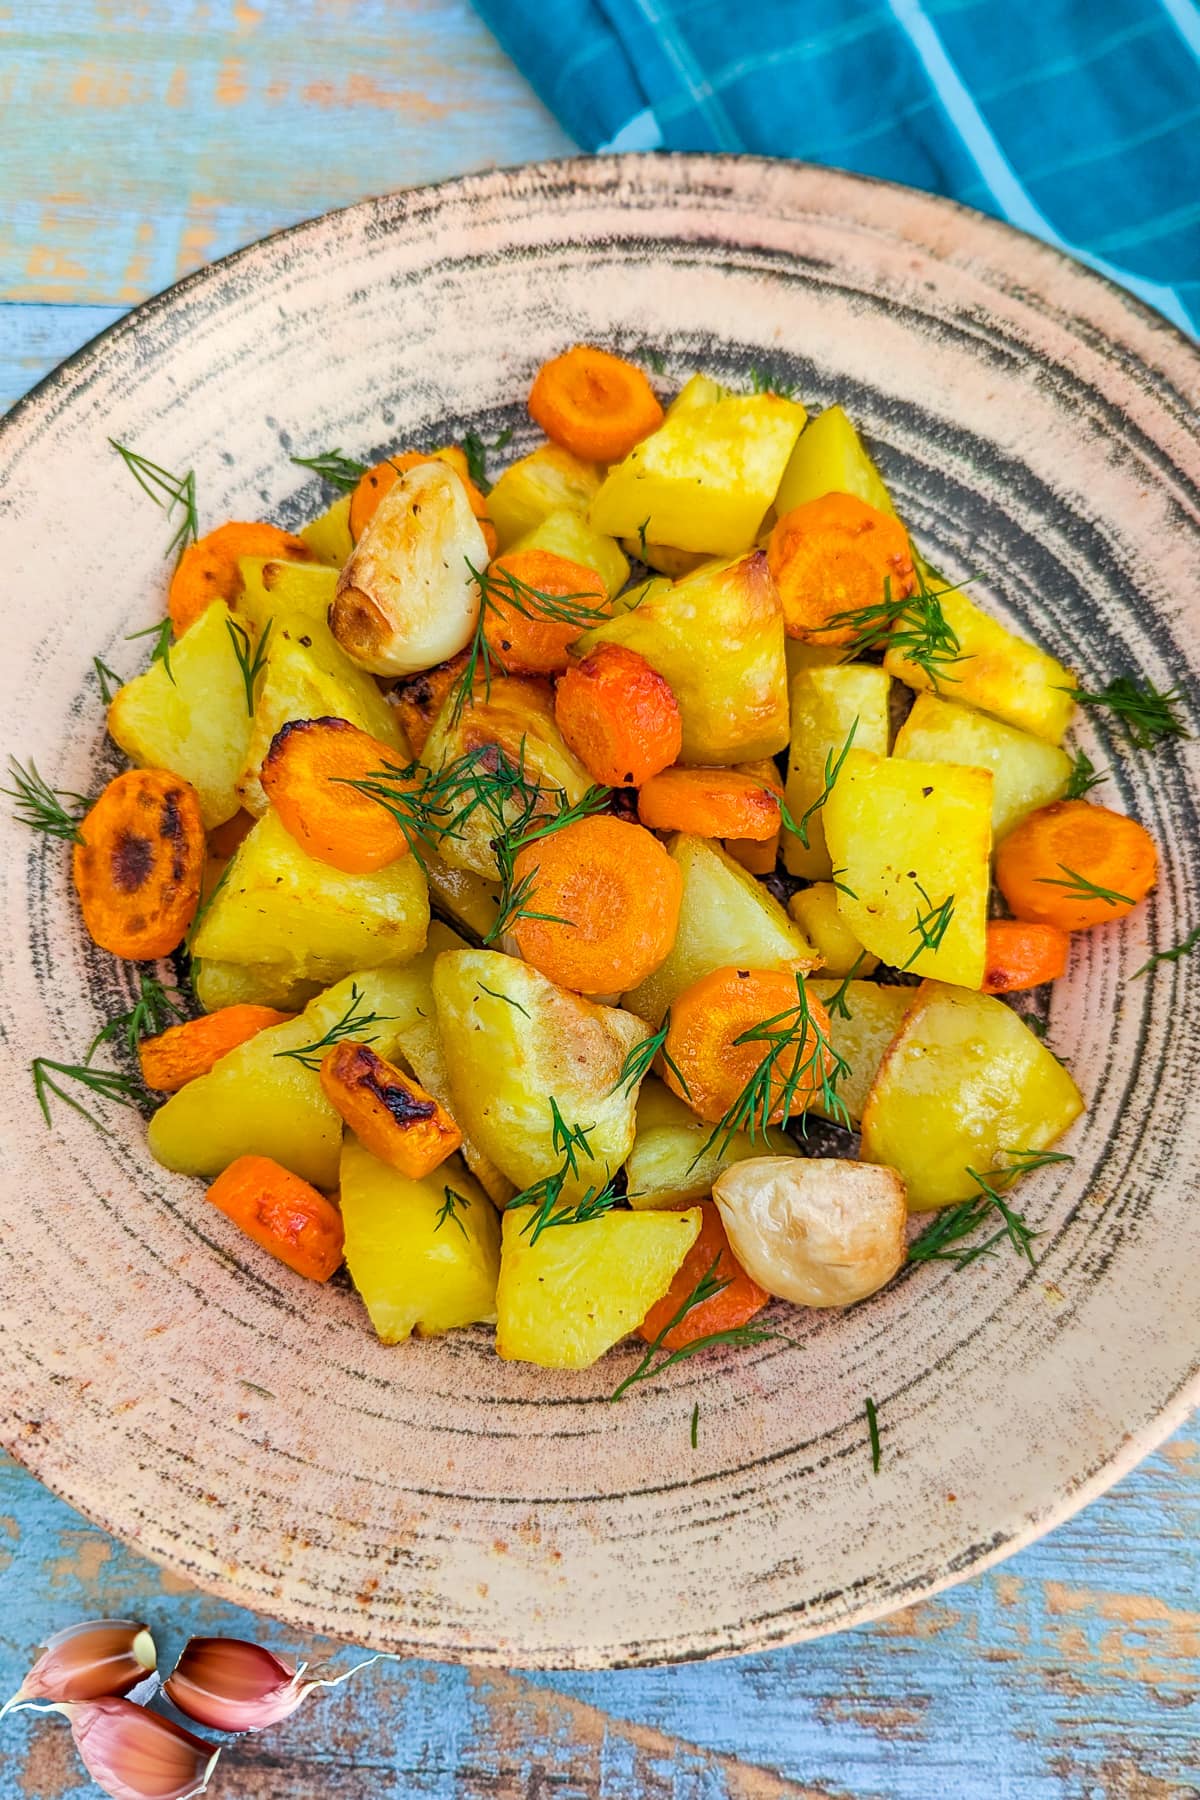 Close view of roasted potatoes, carrots and dill in a vintage plate.